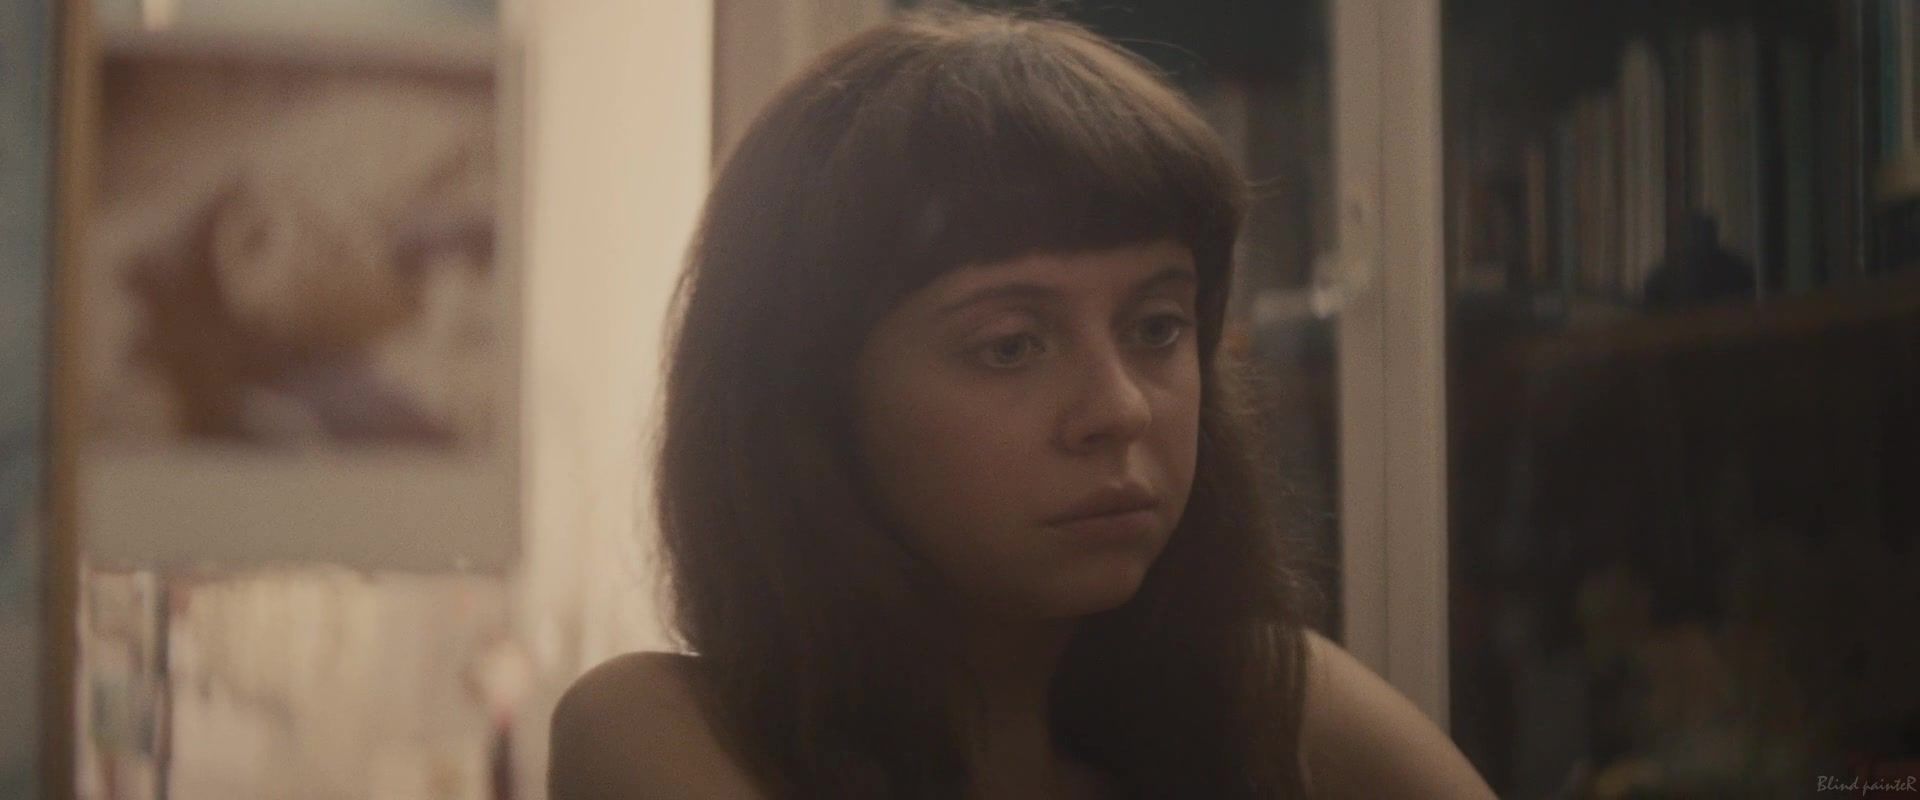 Van Full Frontal and sex video | Celebrity Bel Powley nude from the movie "The Diary Of A Teenage Girl" (2015) Sexy bikini